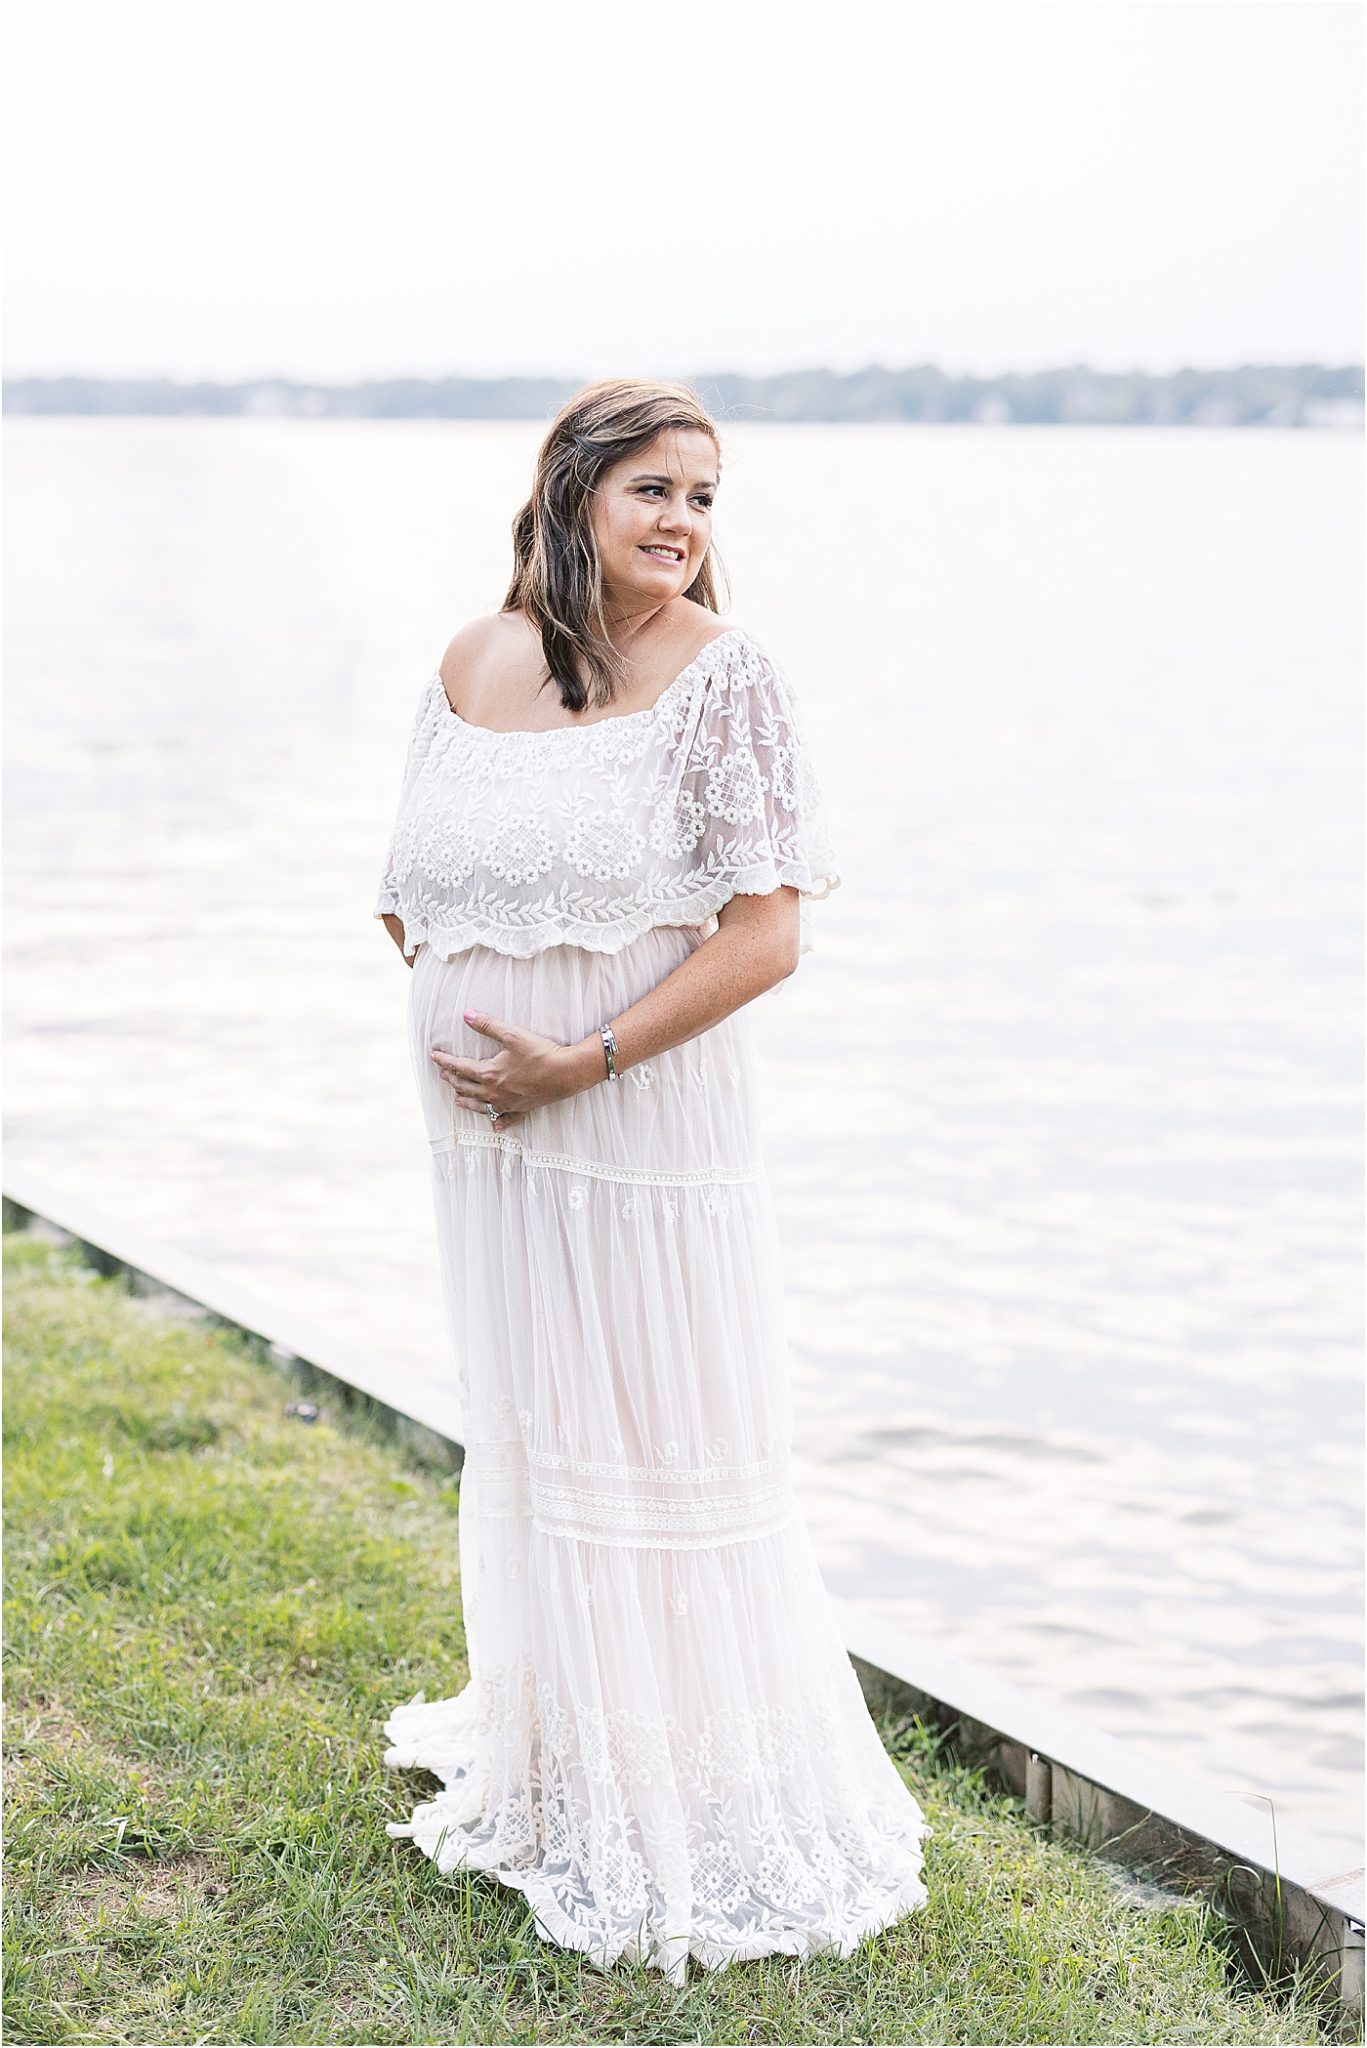 Pregnant mom in beautiful lace dress | Lindsay Konopa Photography